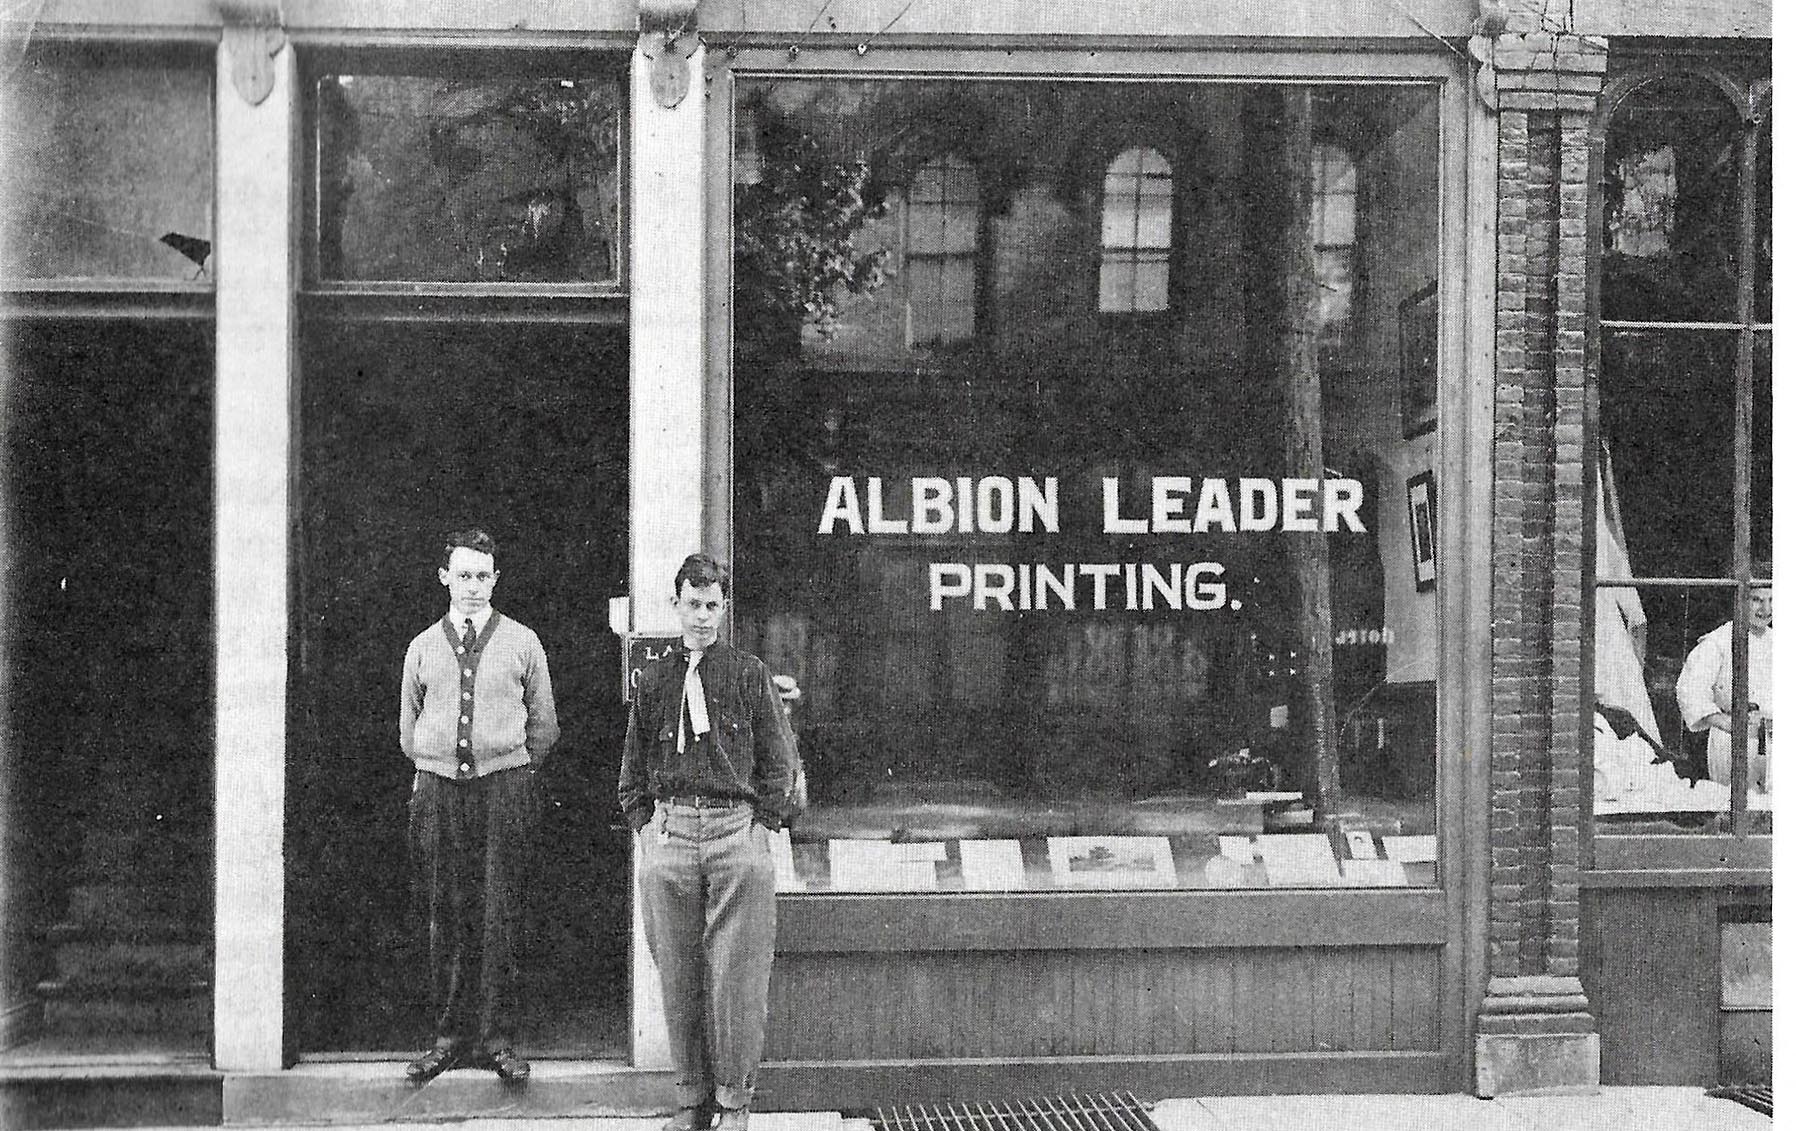 THE ALBION LEADER